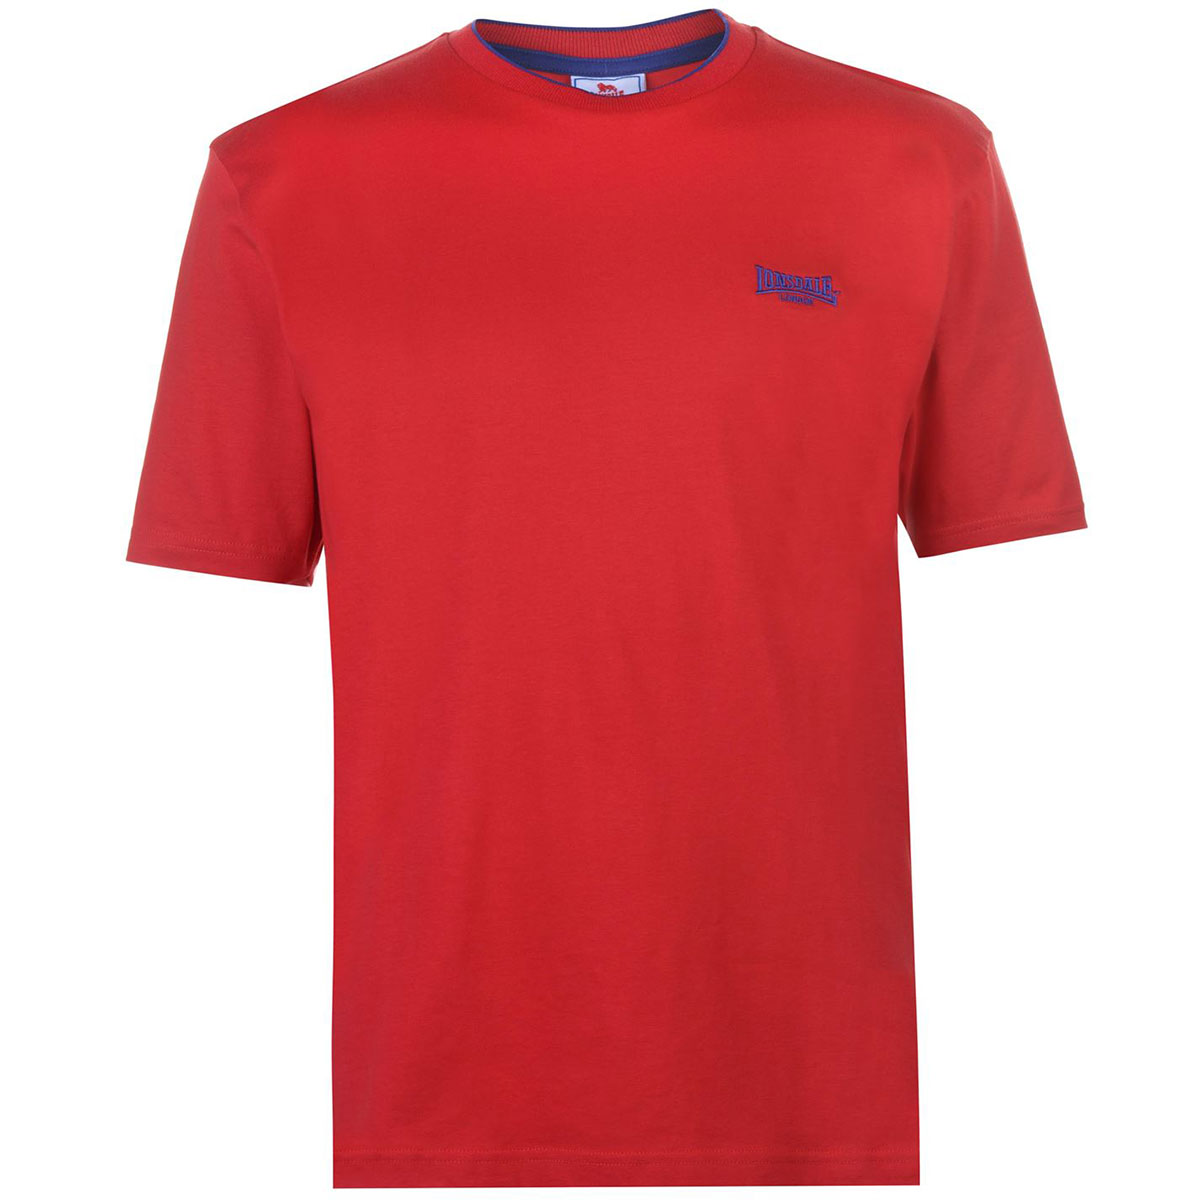 Lonsdale Men's Tipped Tee - Red, 4XL